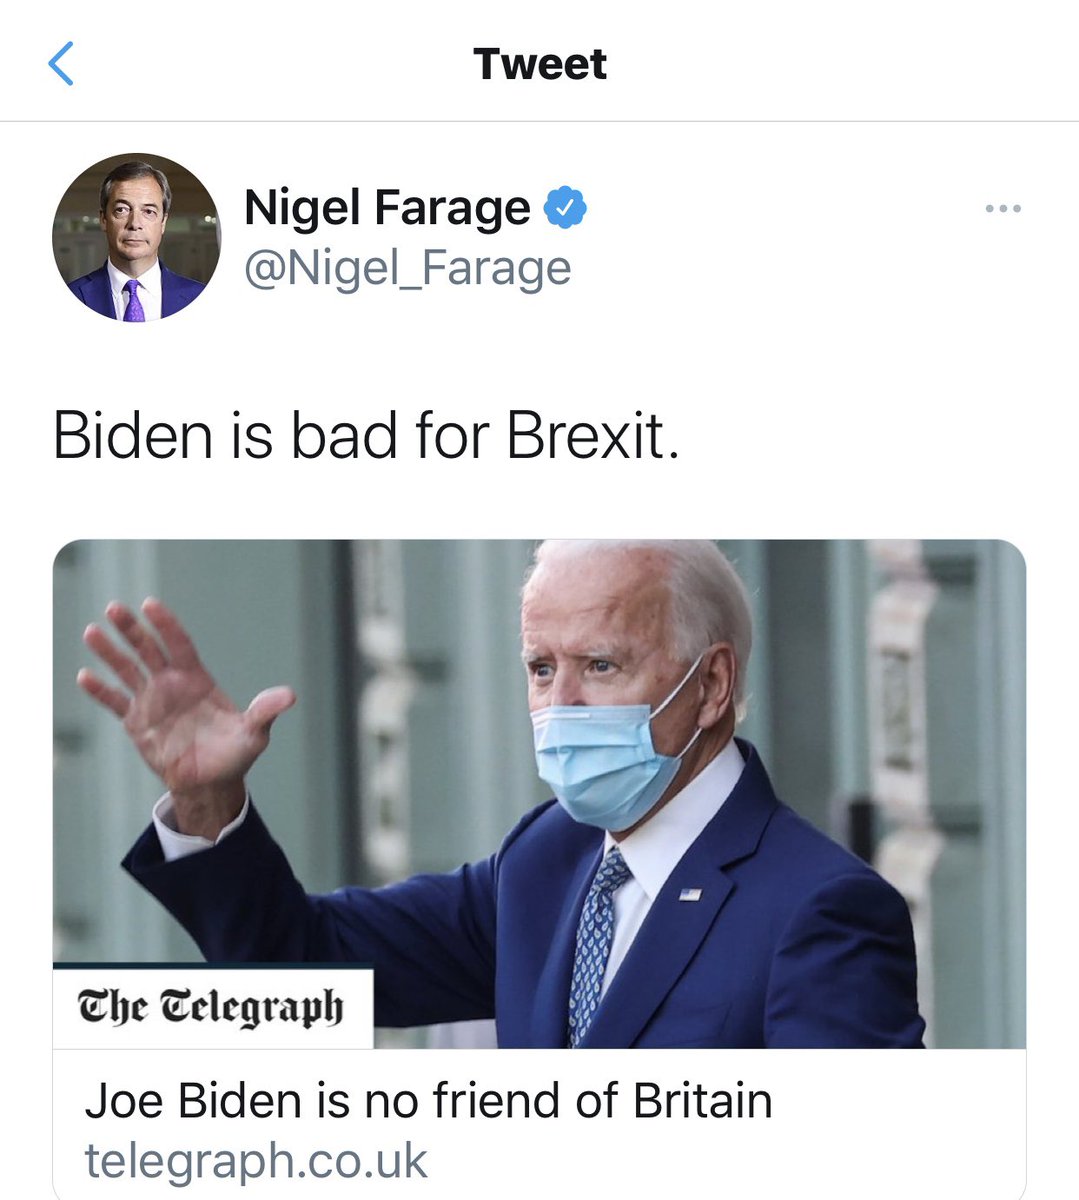 Truth is ⁦@JoeBiden⁩ will be a friend to #Ireland & #Britain. It’s ⁦@Nigel_Farage⁩ arguments that are bad for both #Brexit & Britain. The argument that to be pro-Irish equates to being anti-British is complete nonsense. UK & IRE are neighbours & friends on so much!